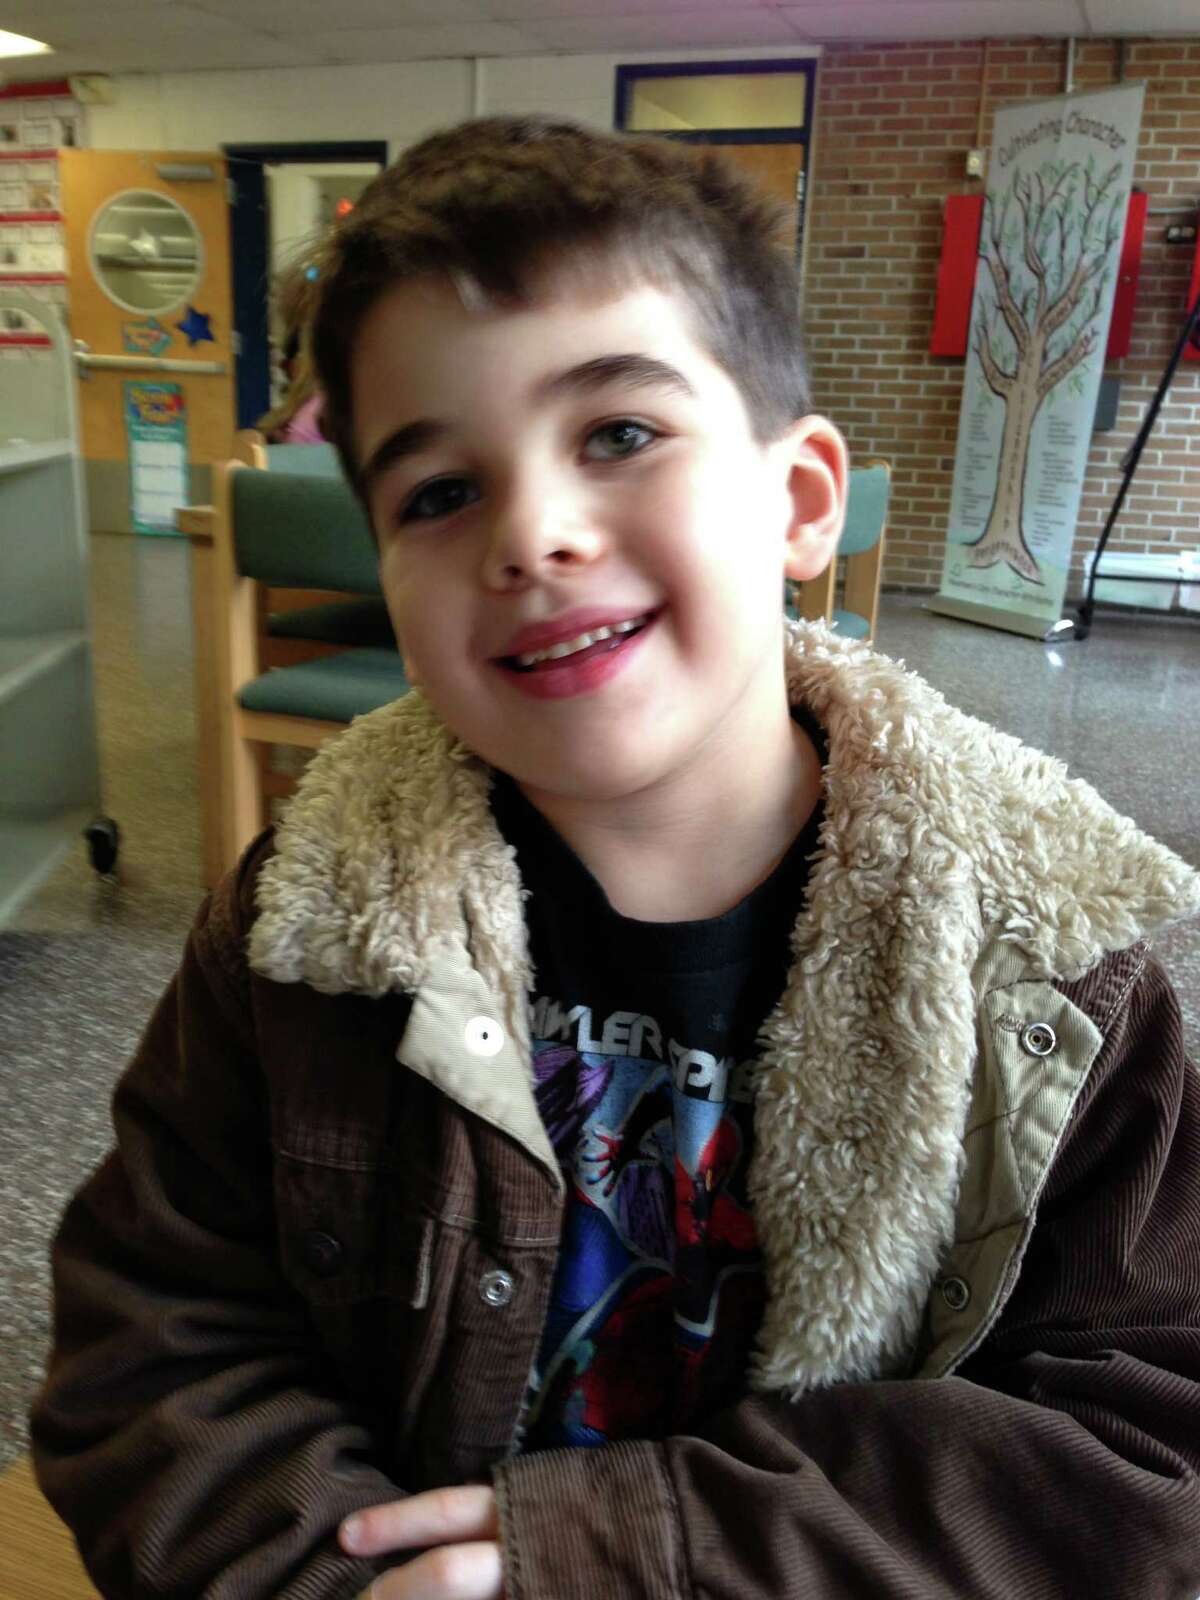 This Nov. 13, 2012 photo provided by the family via The Washington Post shows Noah Pozner. The six-year-old was one of the victims in the Sandy Hook elementary school shooting in Newtown, Conn. on Dec. 14, 2012. (AP Photo/Family Photo)